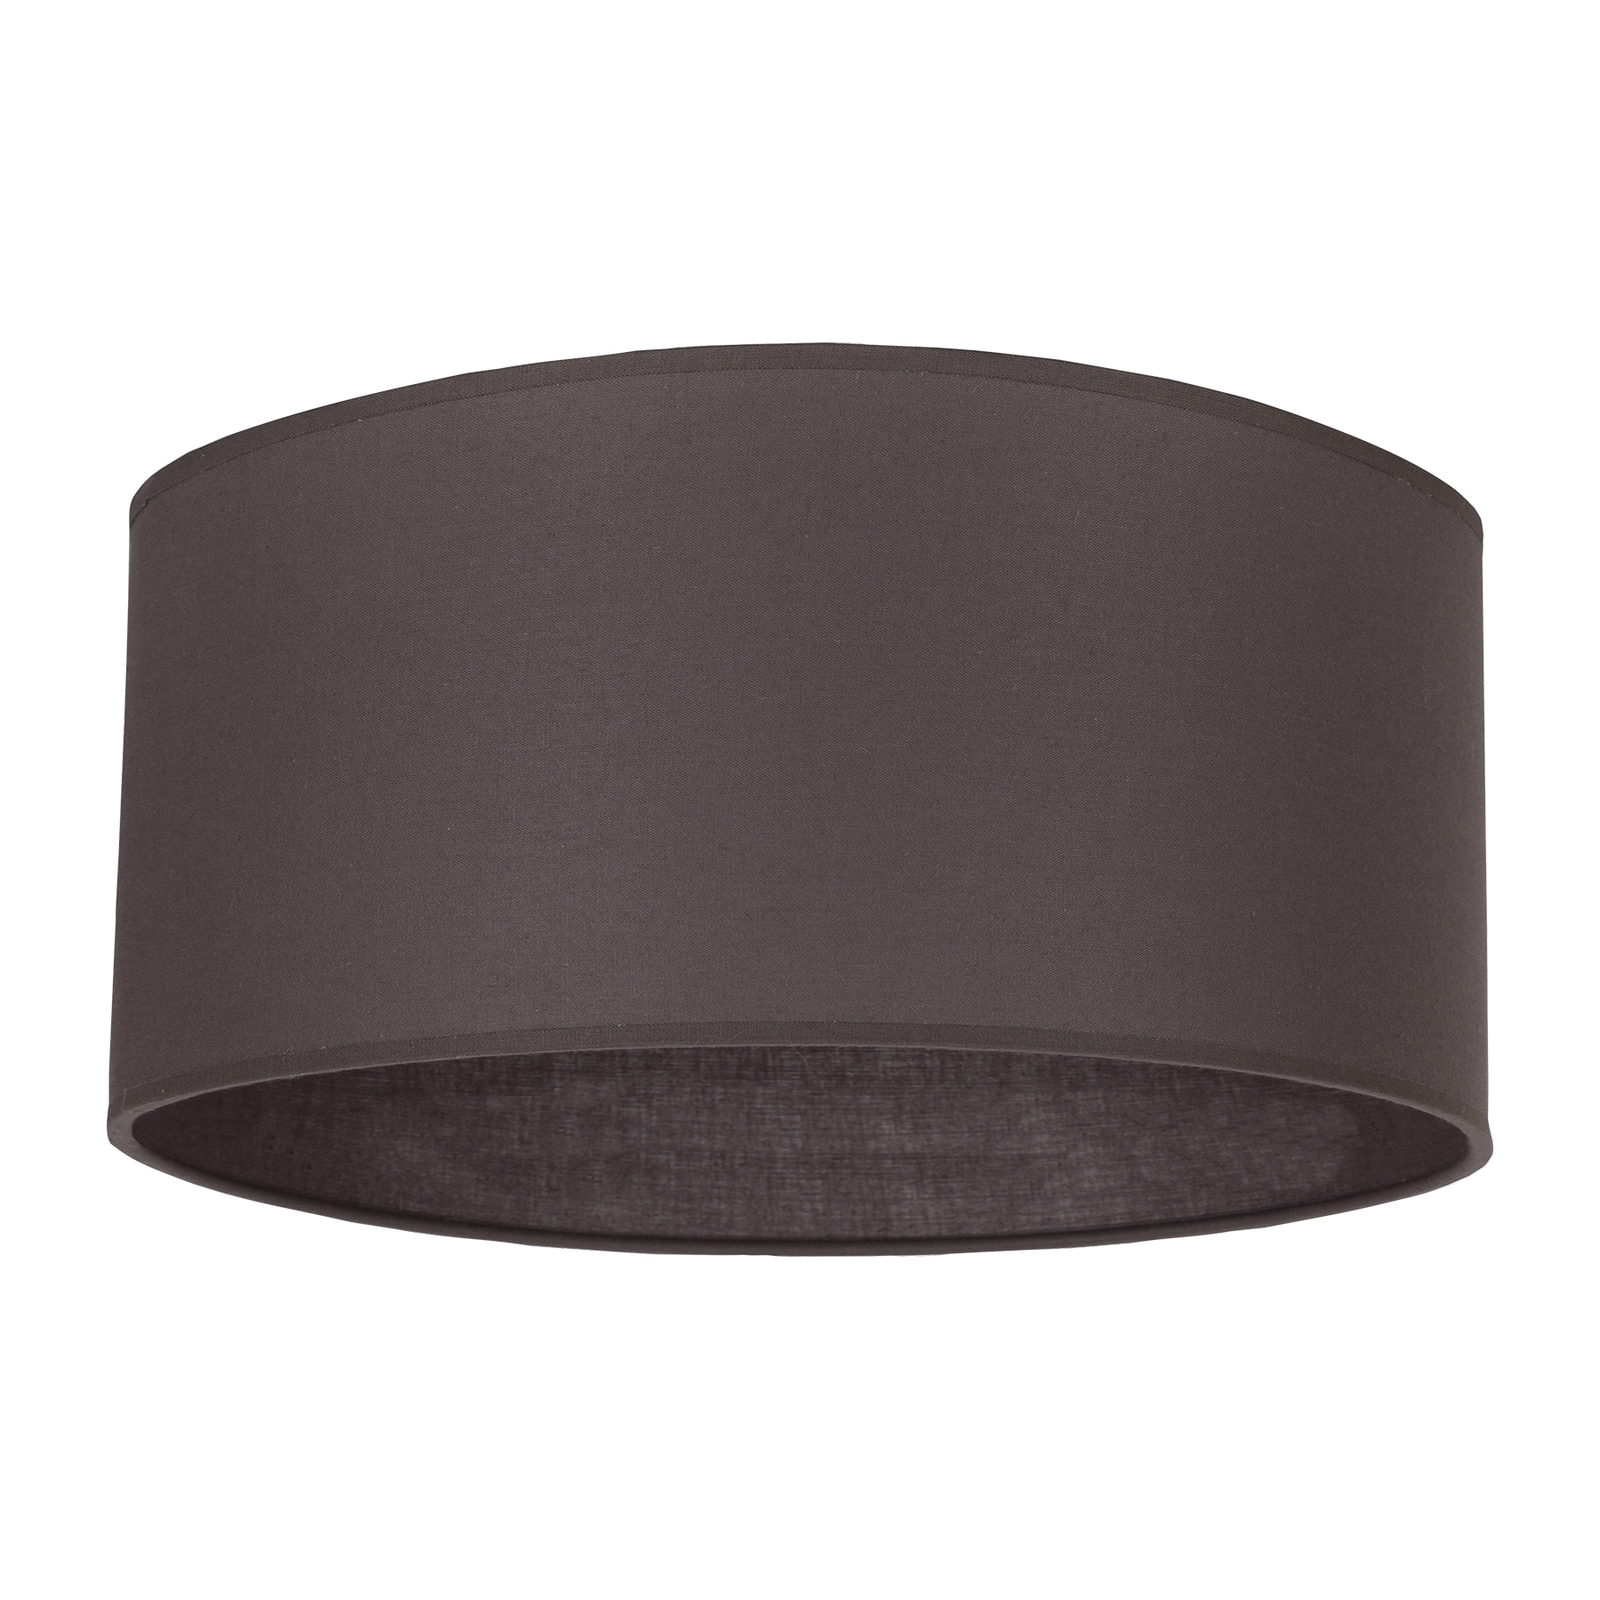 Roller lampshade earth brown Ø 50cm, height 24cm